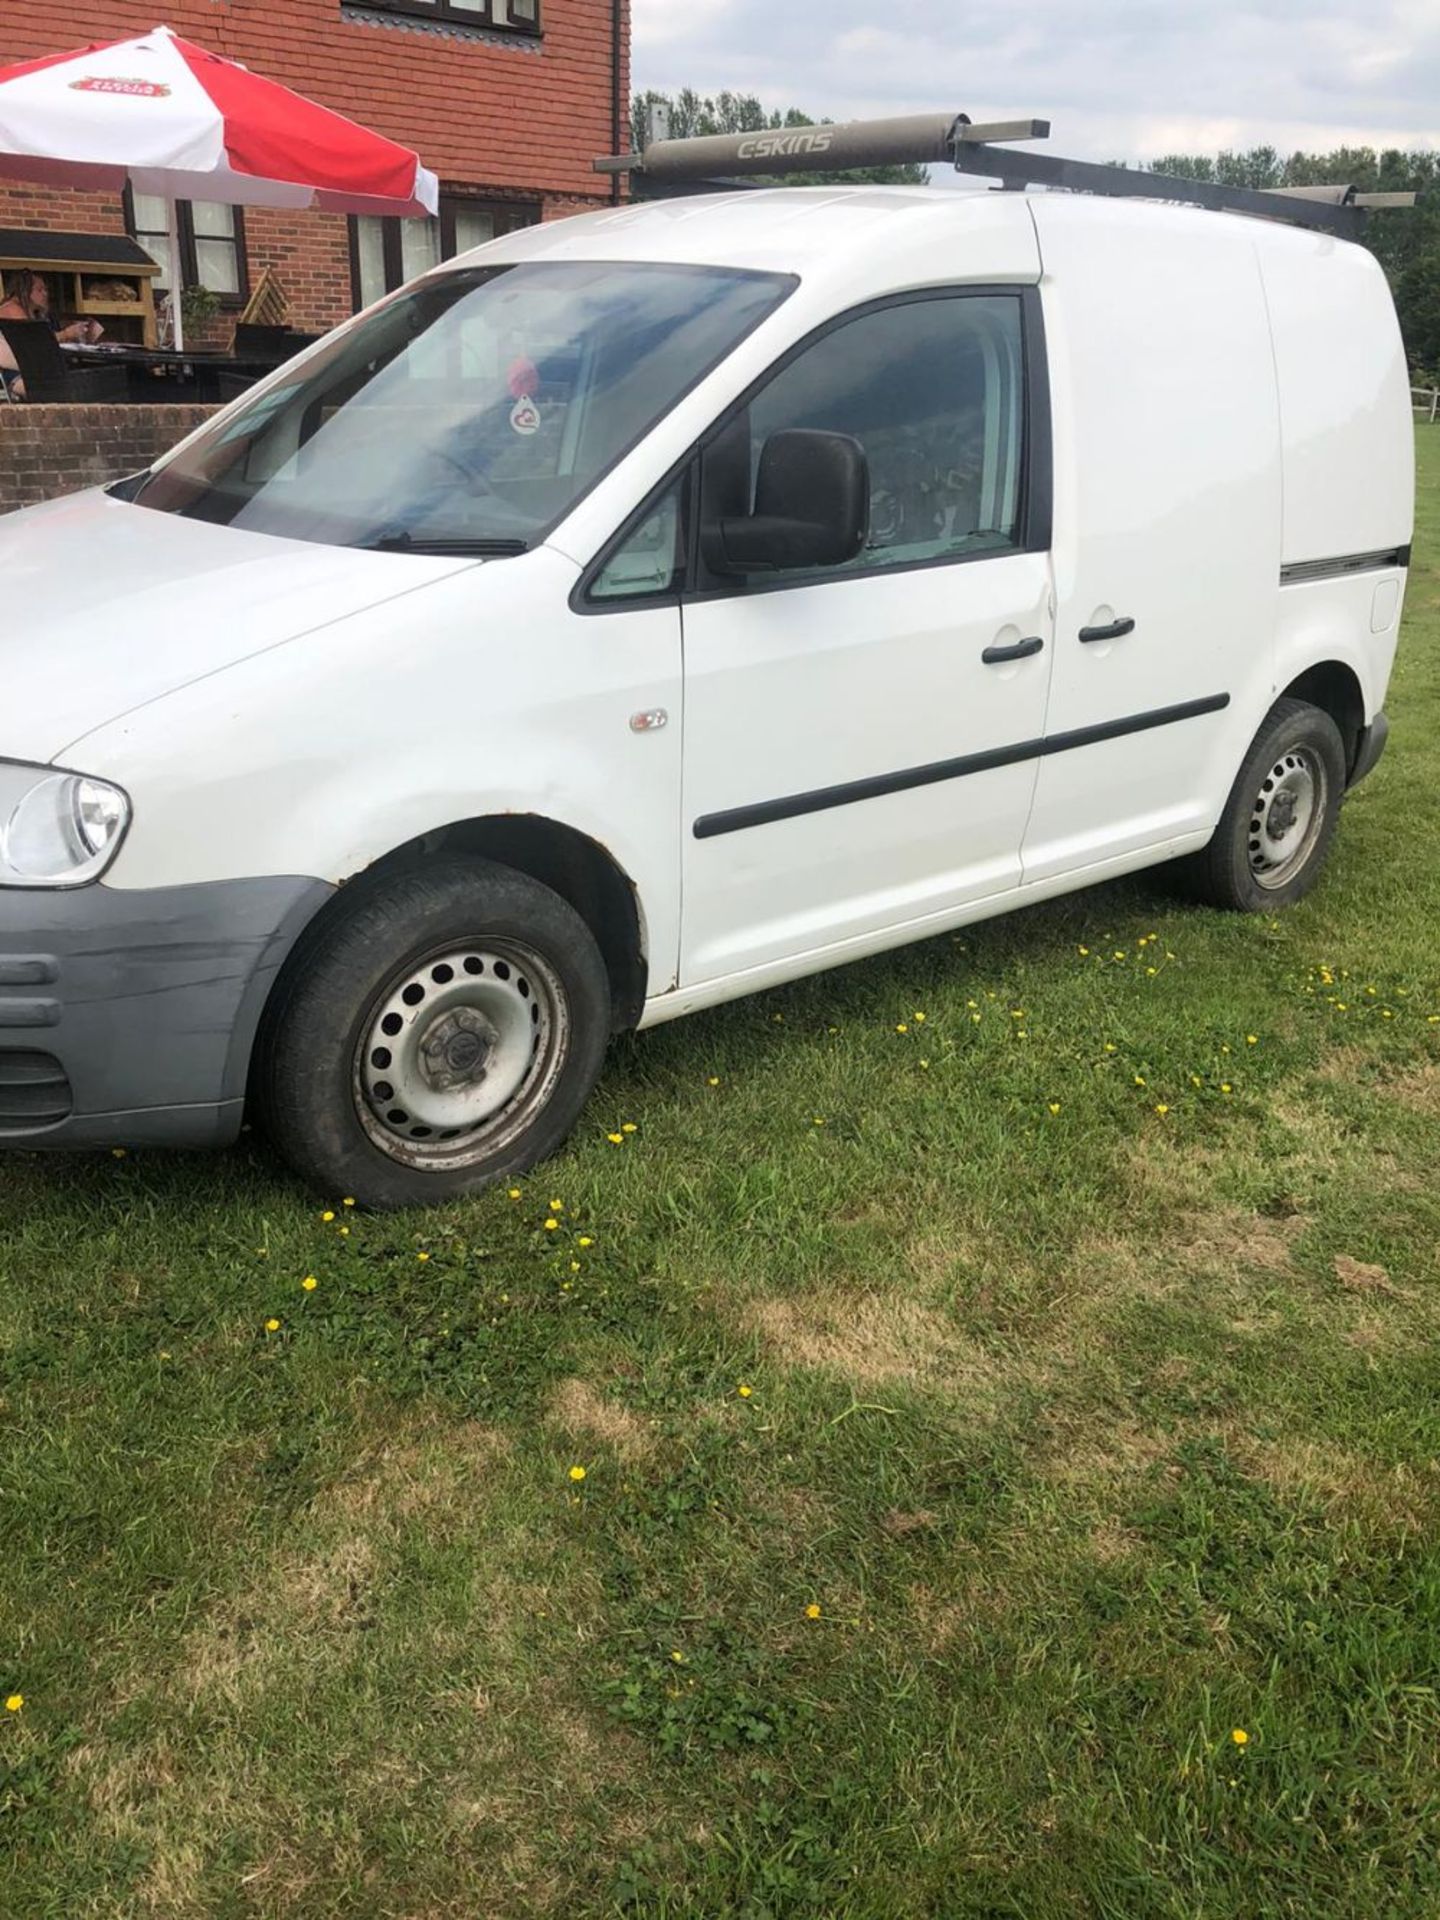 VOLKSWAGON CADDY PANEL VAN REG:LG09 0NL WITH V5 AND TESTED UNTIL SEPTEMBER 137051 REC MILES. PLEASE - Image 4 of 16